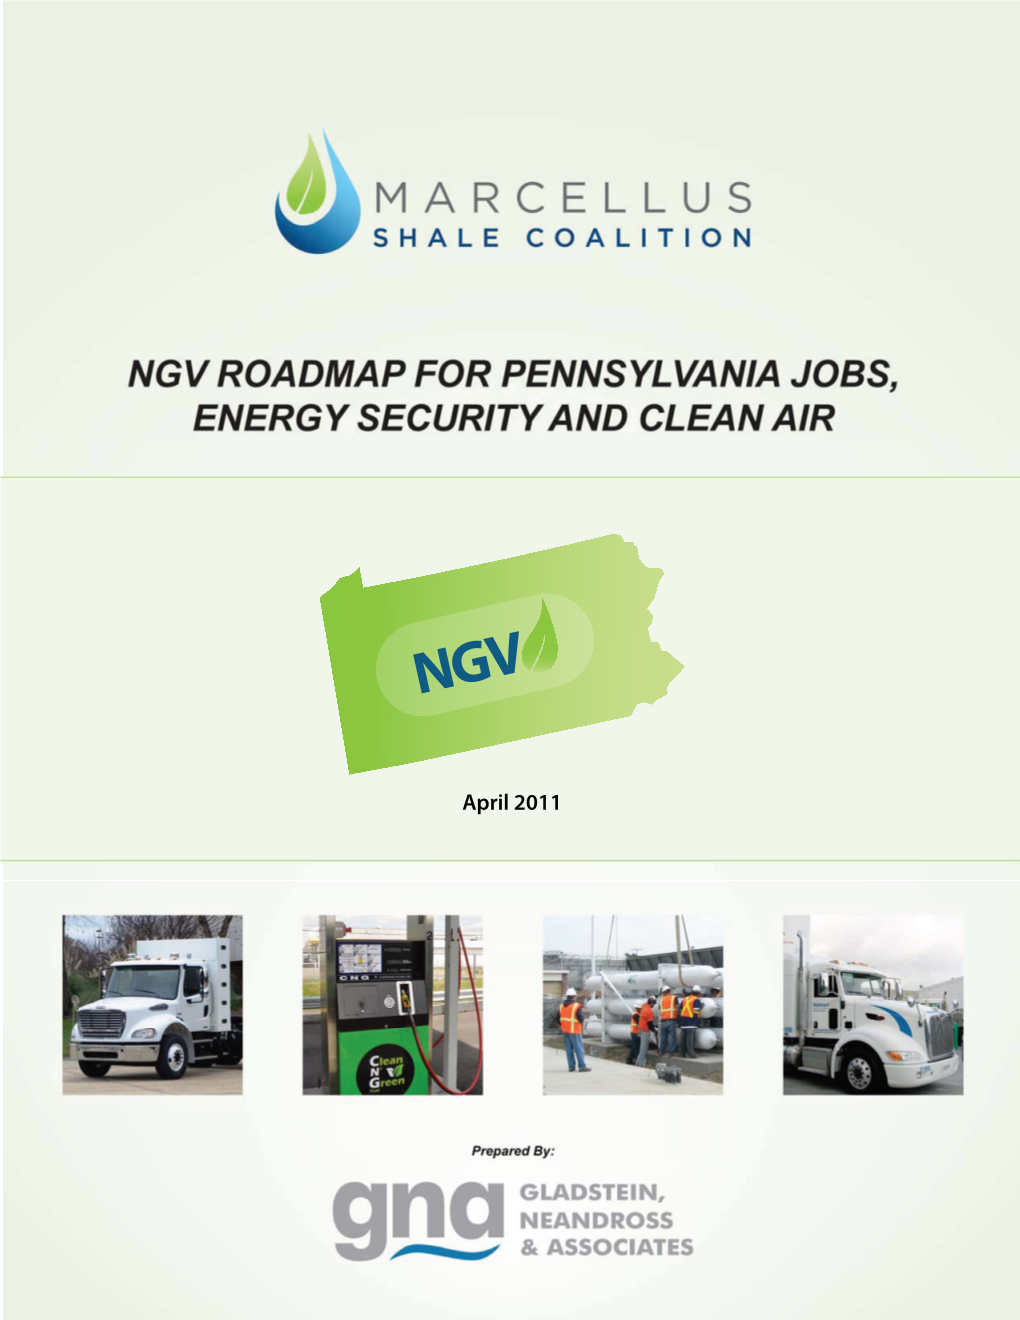 April 2011 NGV ROADMAP for PENNSYLVANIA JOBS, ENERGY SECURITY and CLEAN AIR